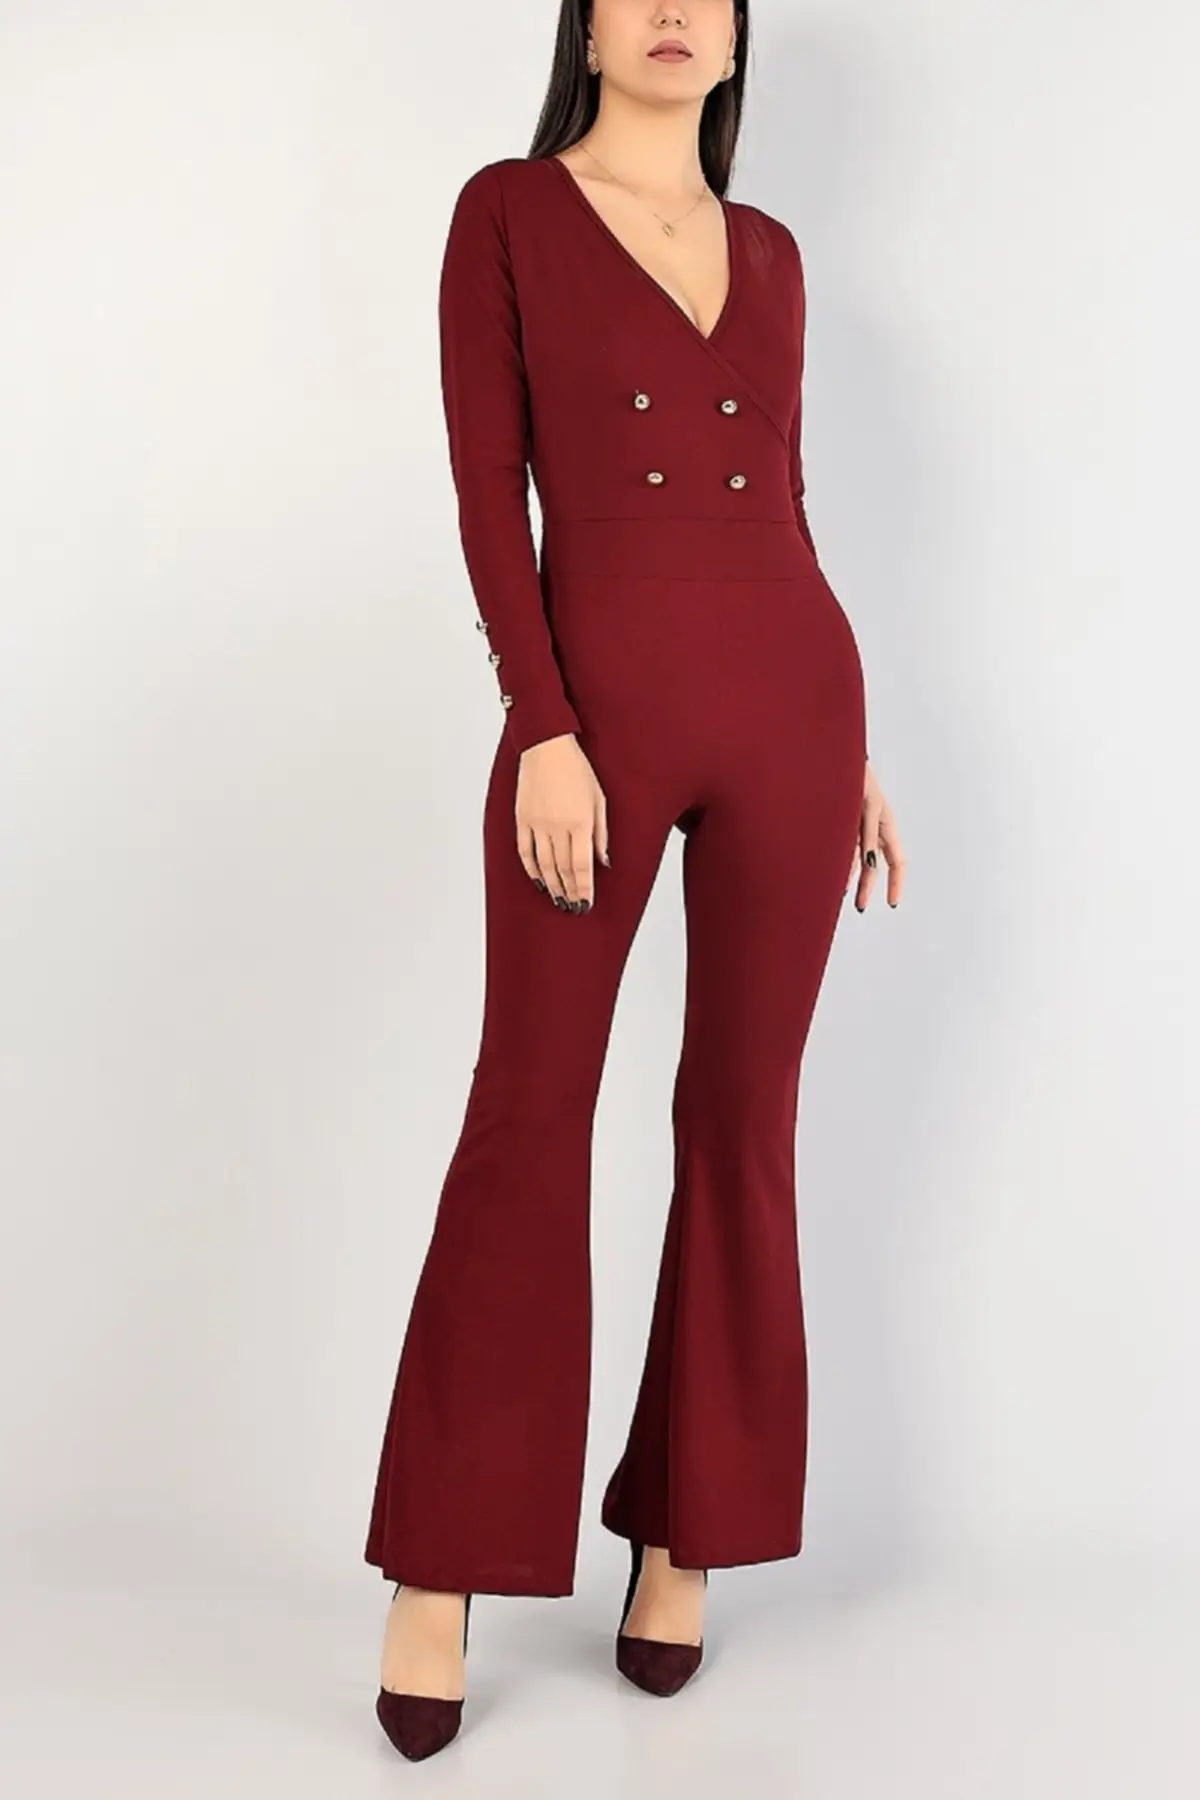 

Women's Overalls Claret Red Crew Neck Jumpsuit Q Hot Style Quality Fabric Sleeveless Baggy Trousers Casual Jumpsuit